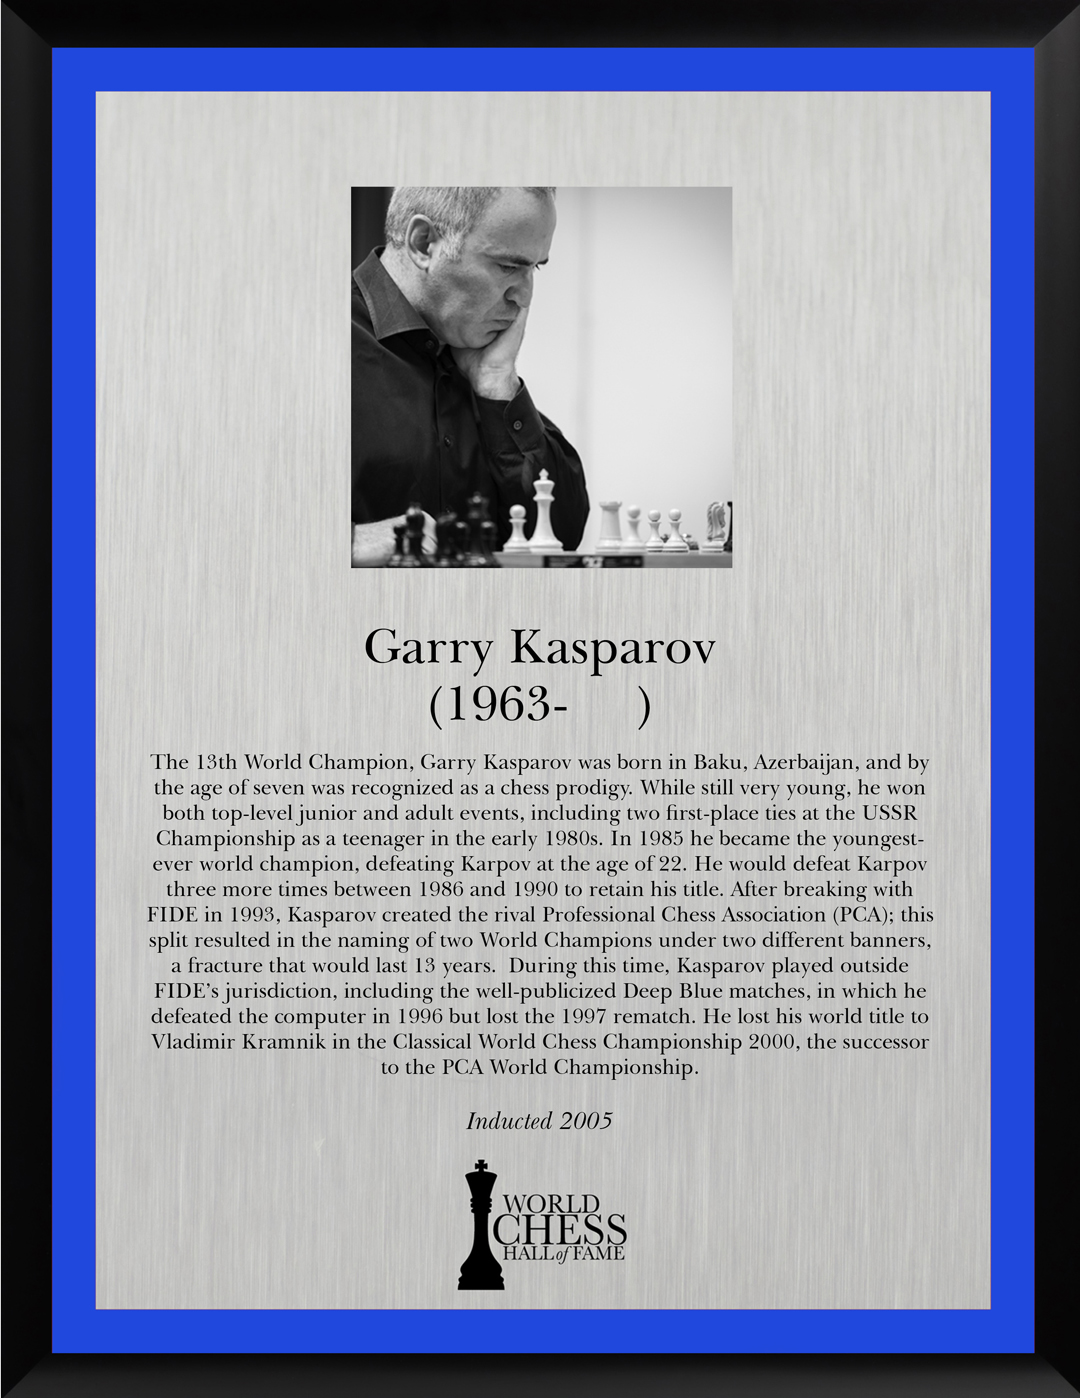 FIDE - International Chess Federation - Happy Birthday to Garry Kasparov!  🎉 The 13th world chess champion was the world's top player for over 20  years and is one of the greatest